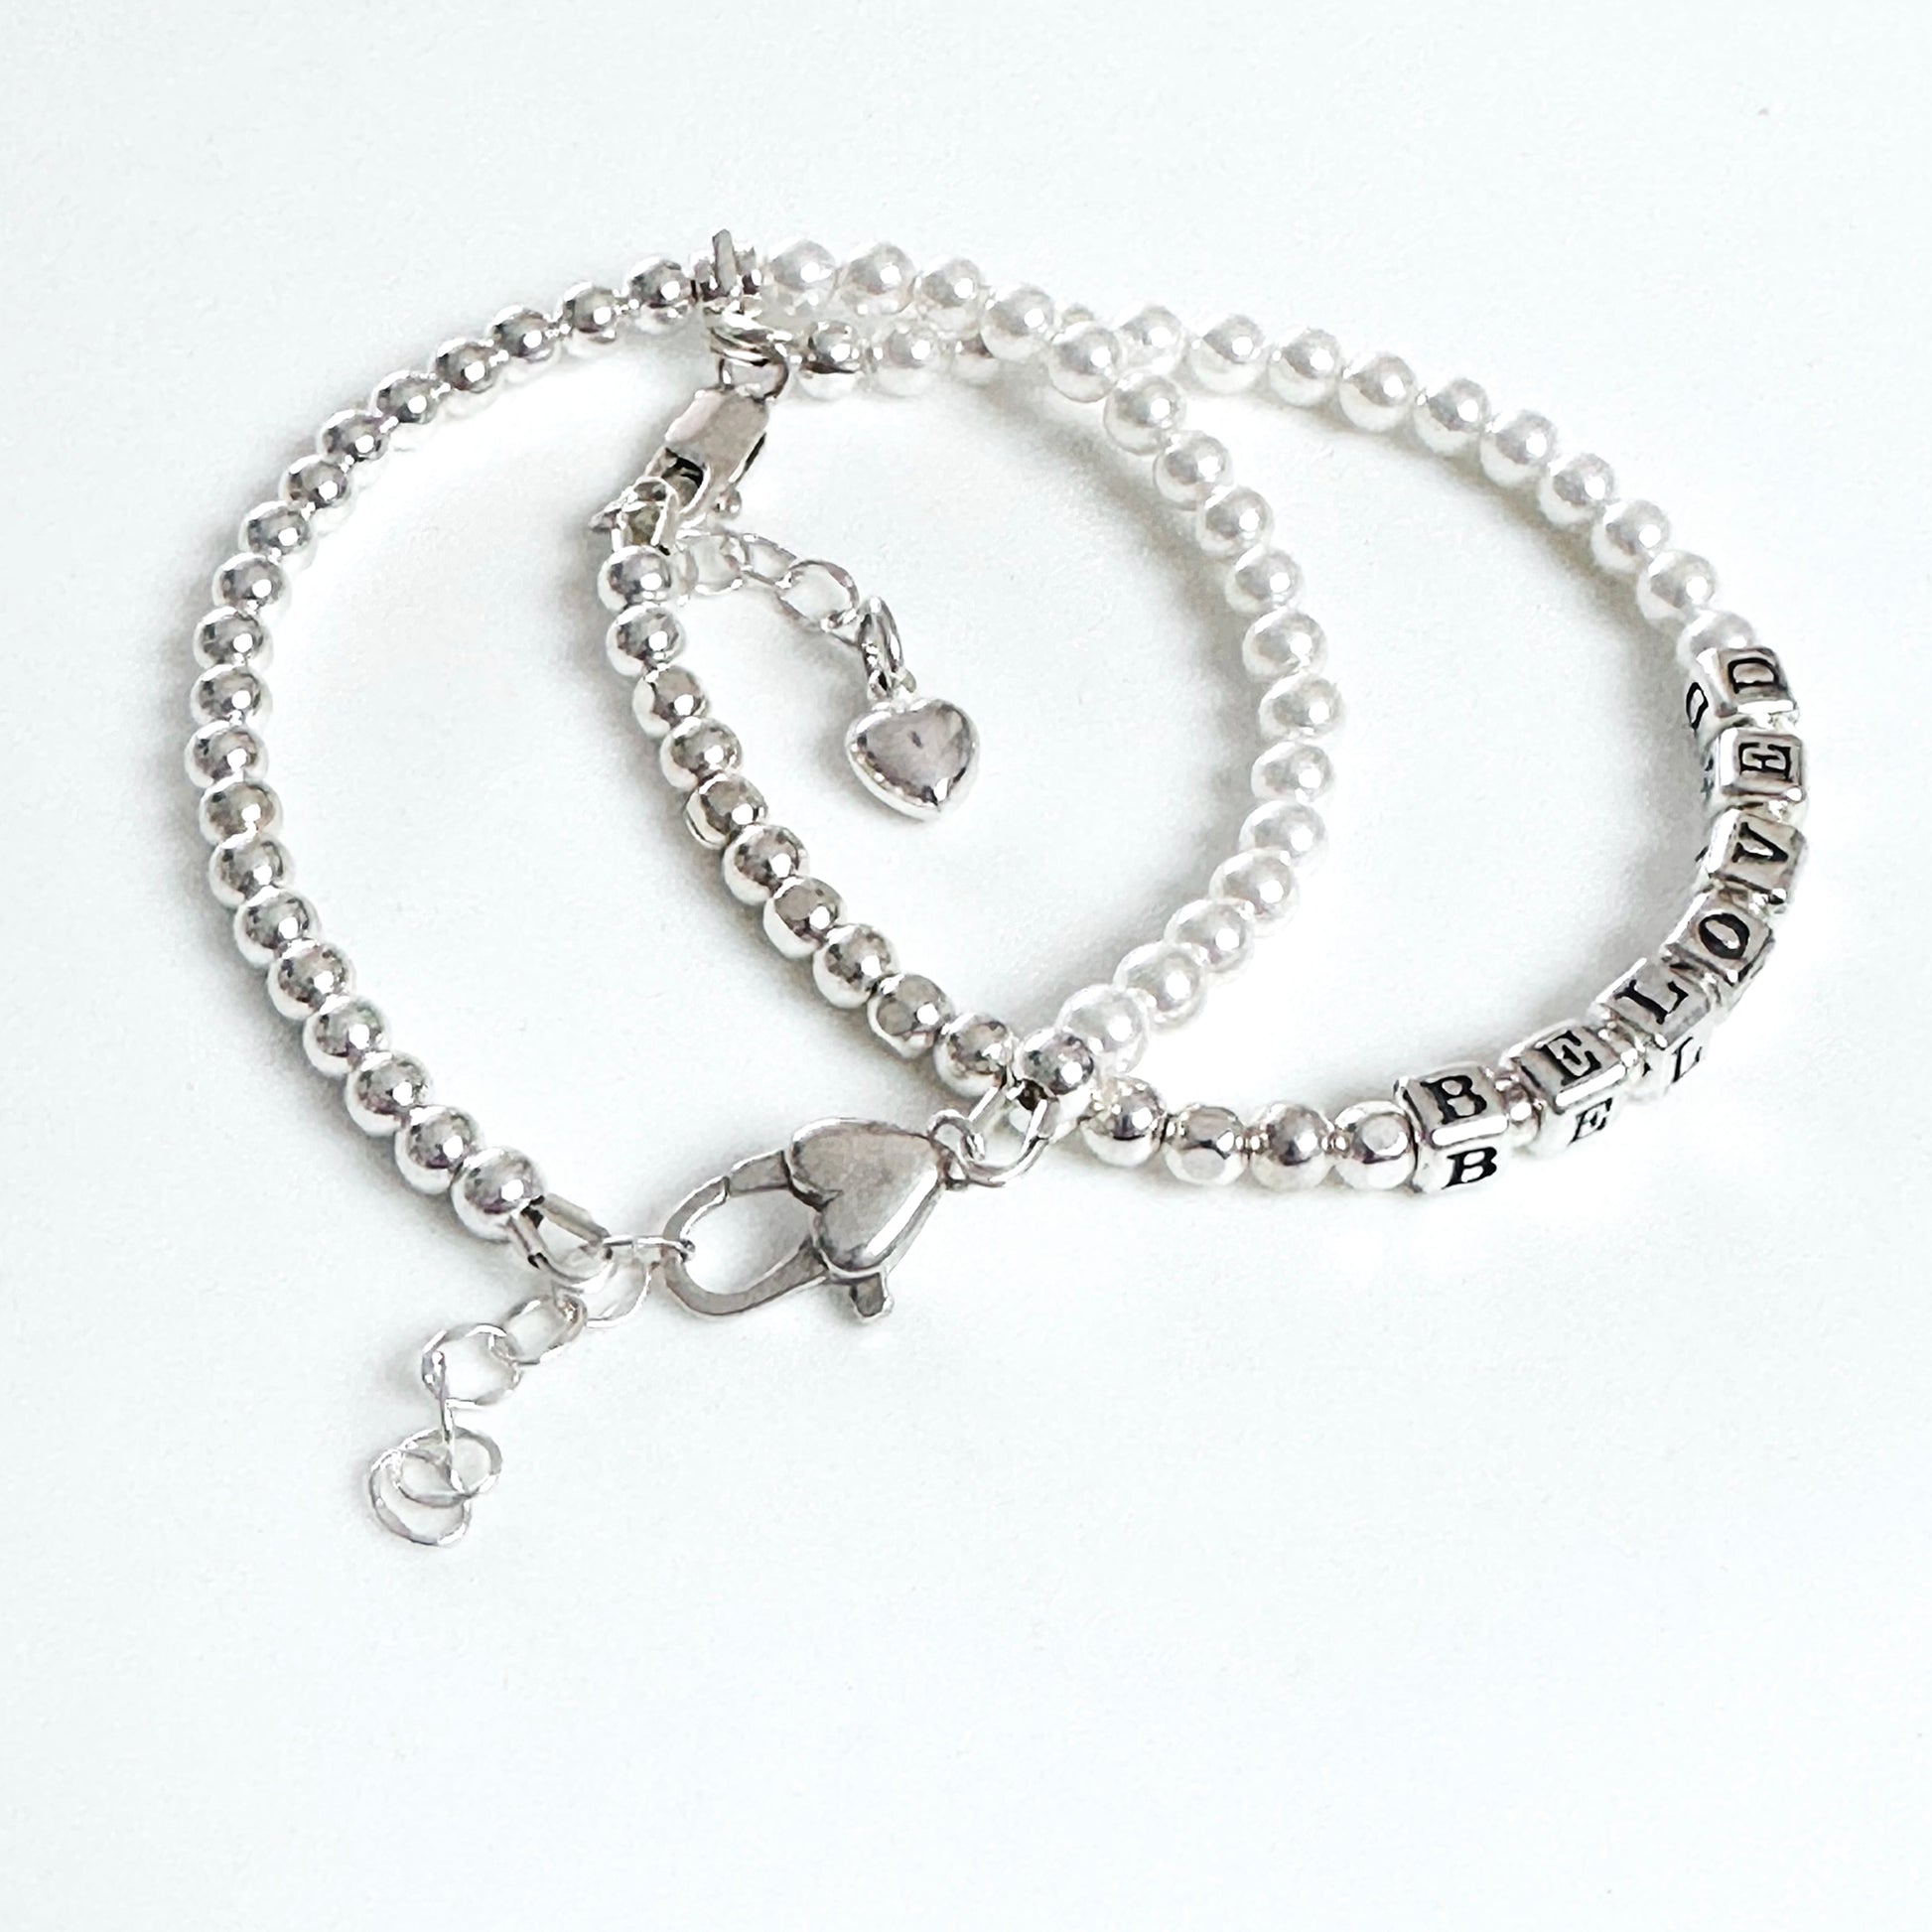 Beloved Mother's Day Bracelet in sterling silver and pearls and heart charm, shown with mixed sterling and pearl stacking bracelet